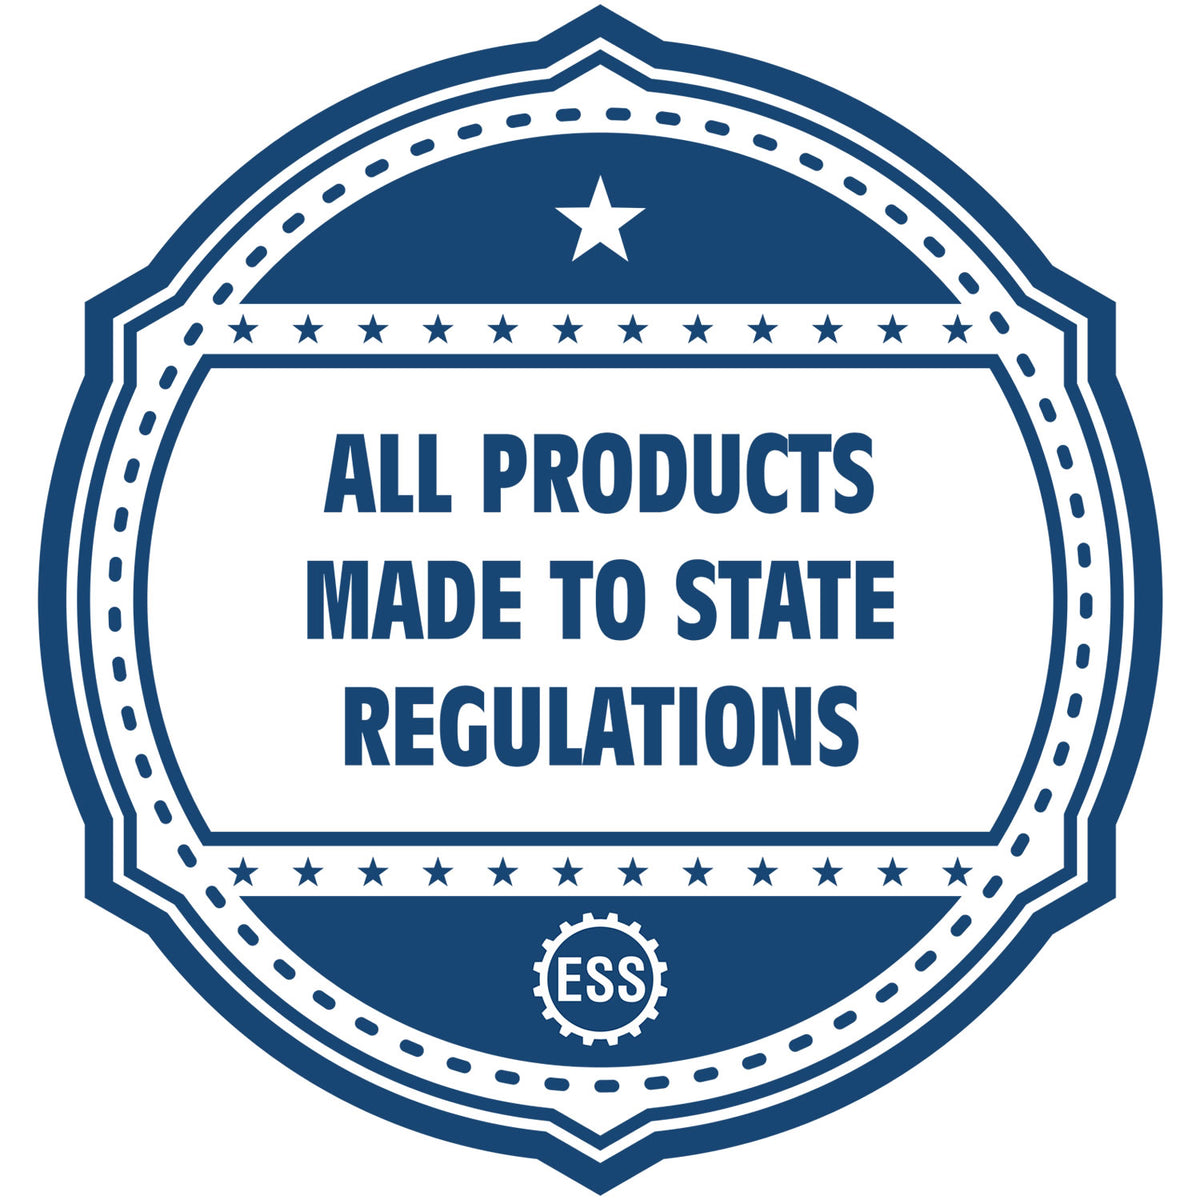 An icon or badge element for the State of Alaska Extended Long Reach Engineer Seal showing that this product is made in compliance with state regulations.